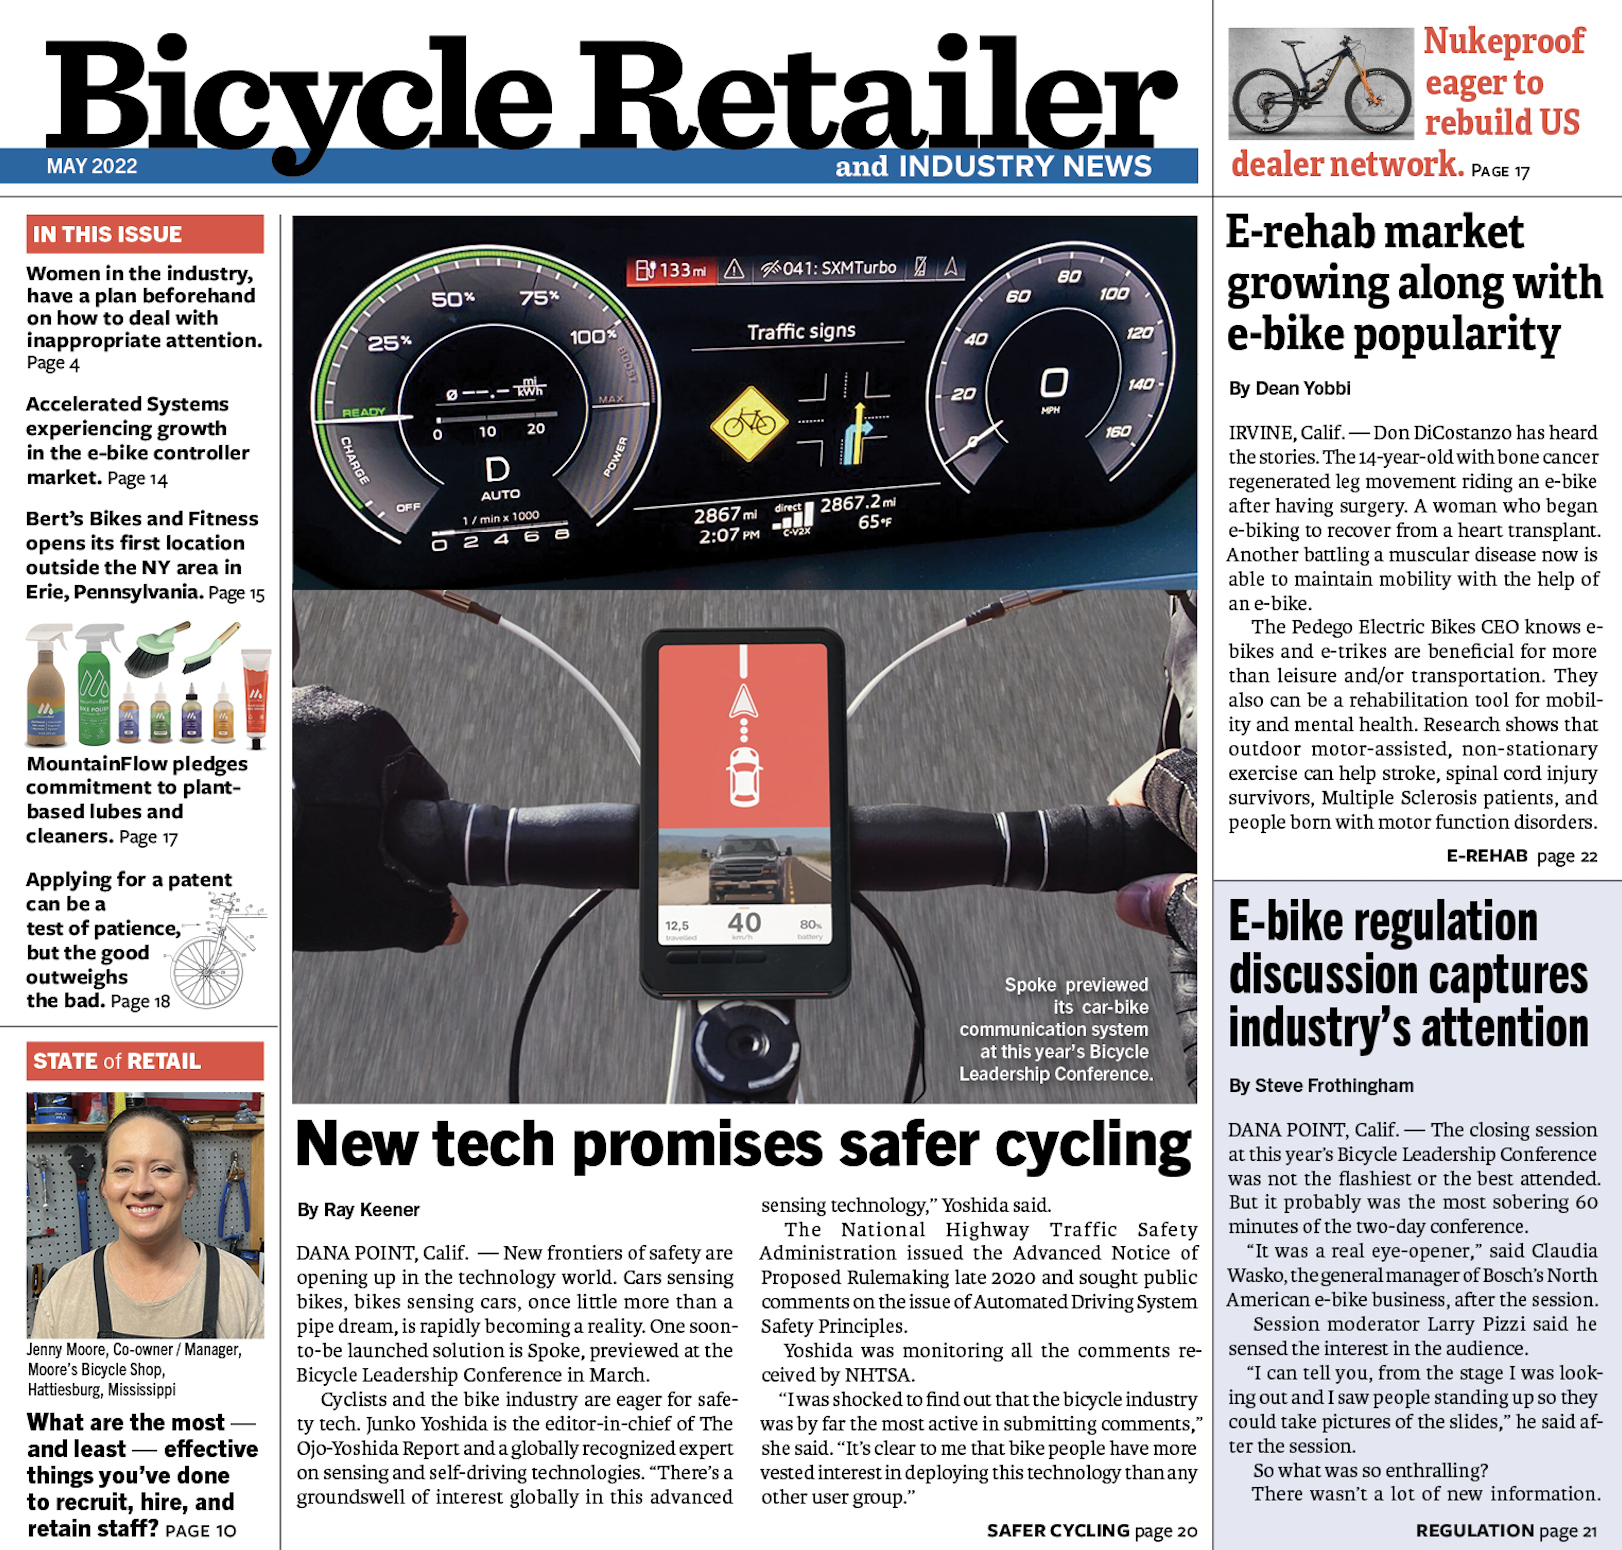 A version of this article ran in the May issue of Bicycle Retailer & Industry News.